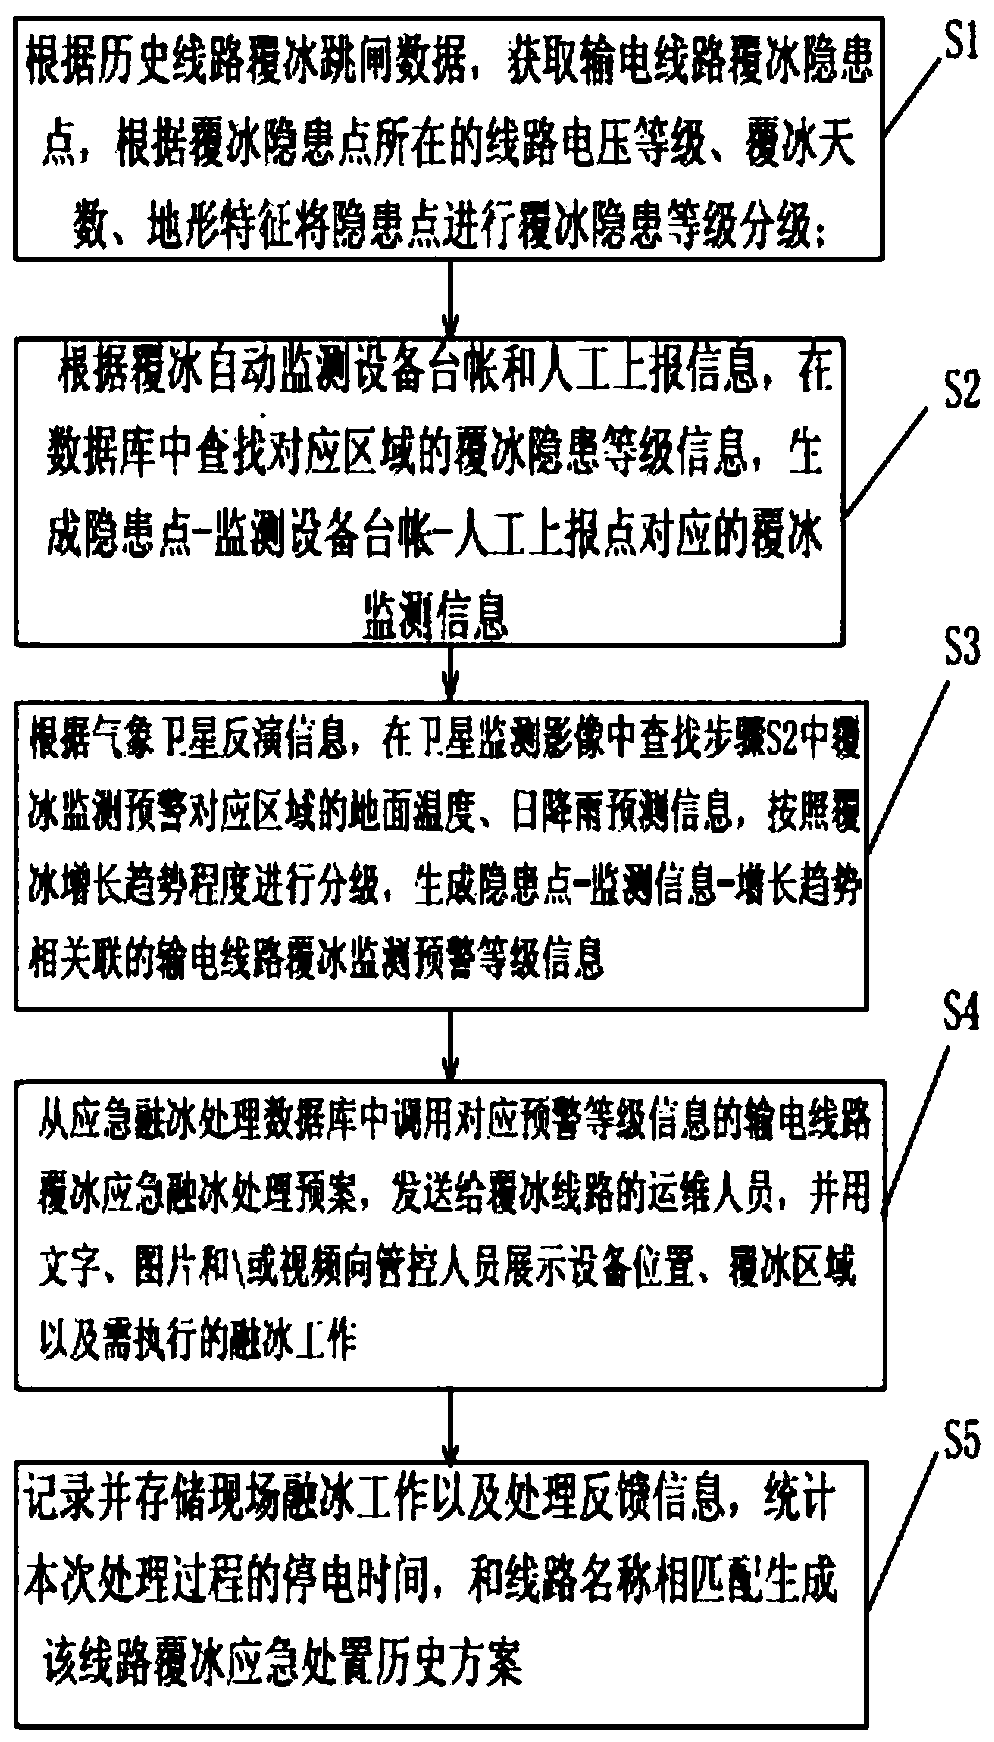 Power transmission line icing multi-source monitoring and early warning method and system